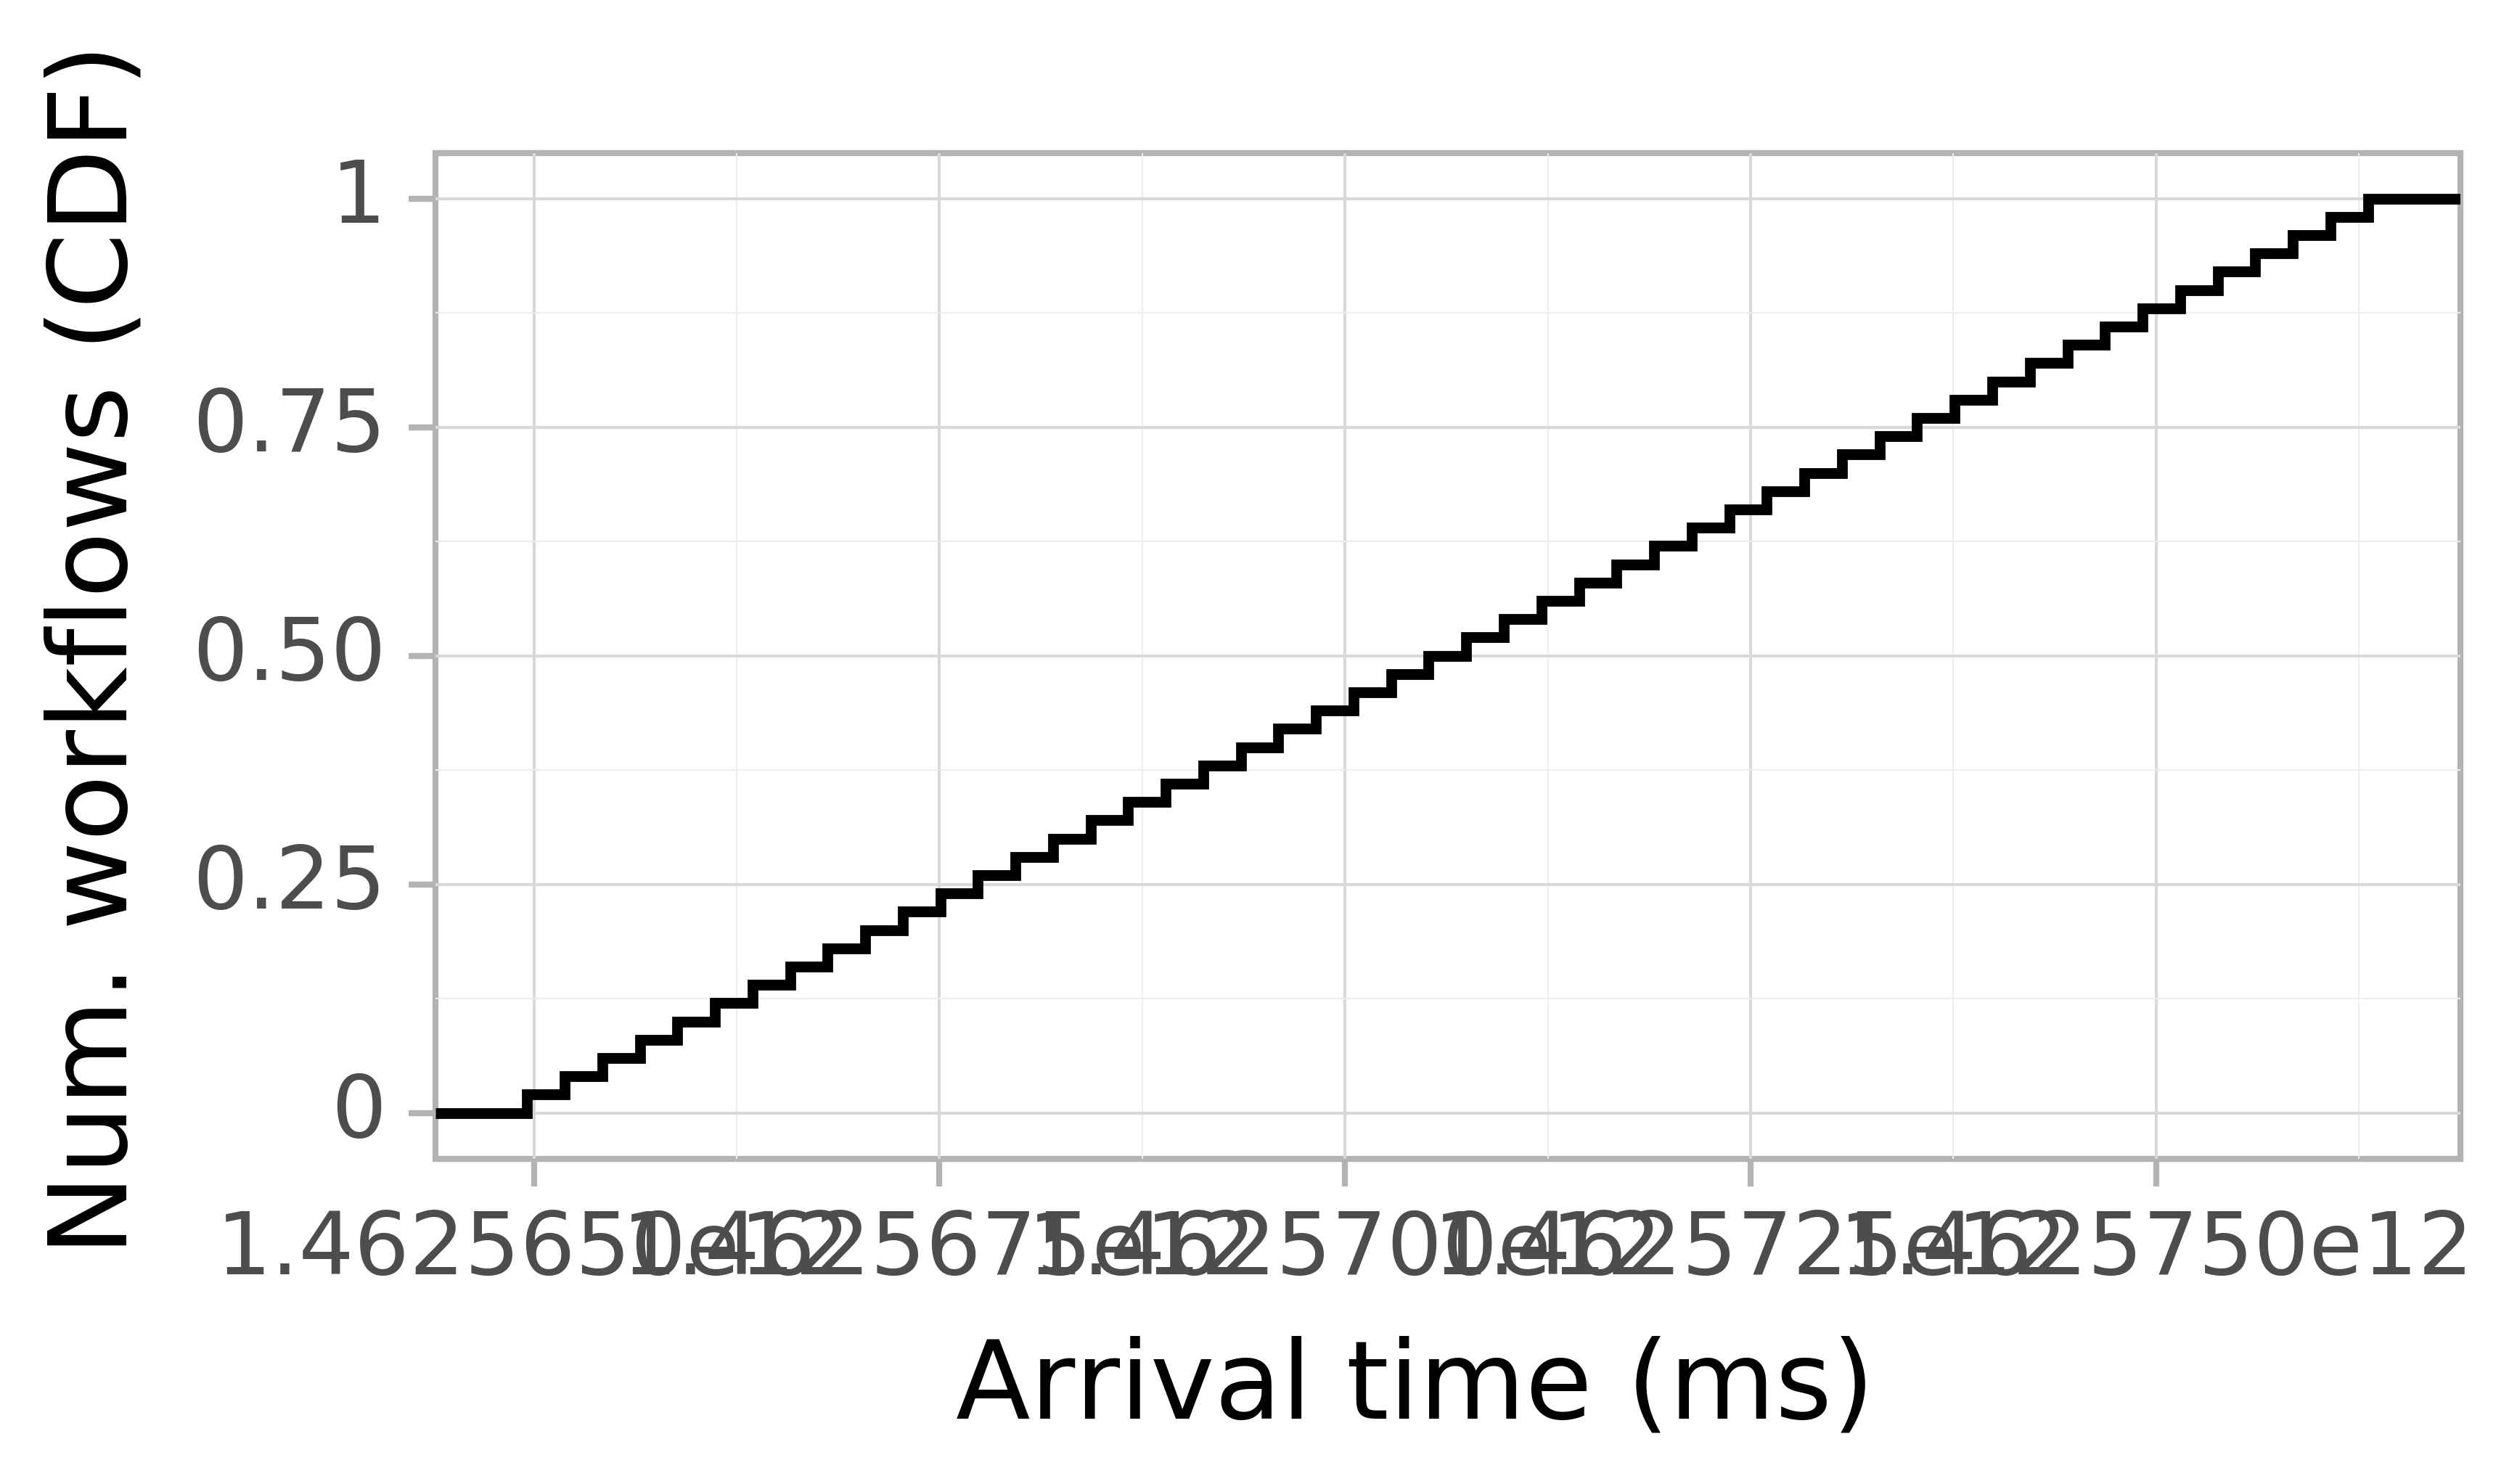 Job arrival CDF graph for the askalon-new_ee41 trace.